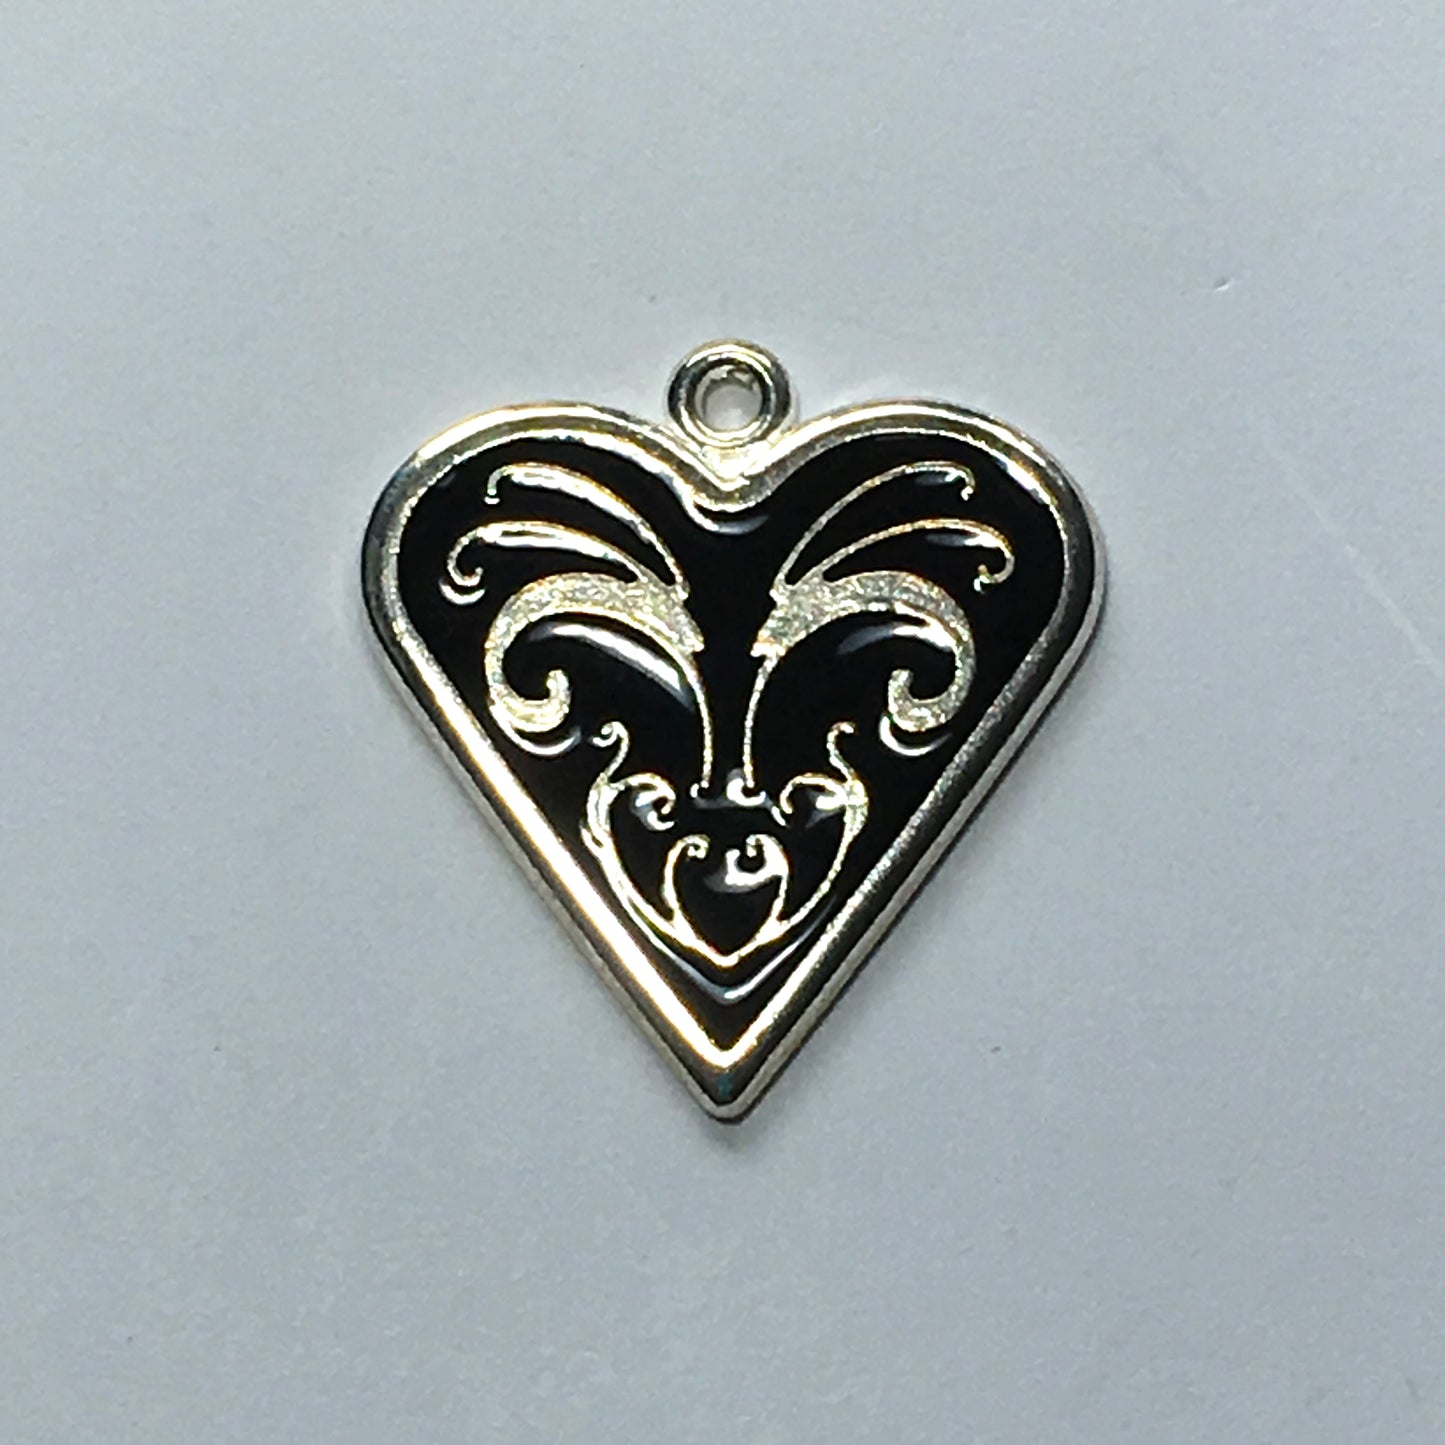 Bright Silver Plated Heart Charm/Pendant with Black Enamel Inlay Vine Design, 25 x 25 mm